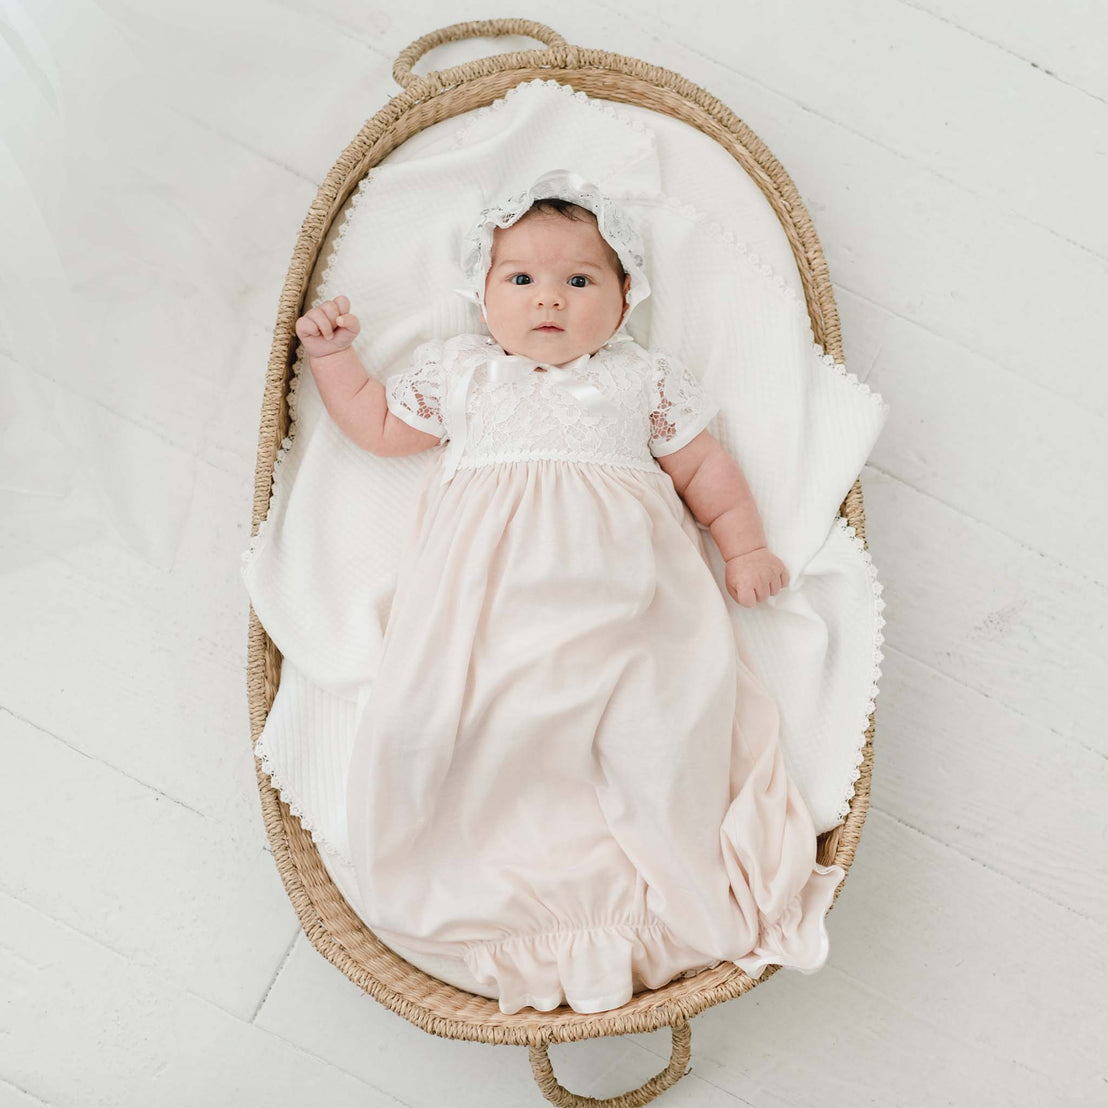 A baby dressed in a Rose Layette & Bonnet and headband lies in a vintage woven basket on a white floor, looking upwards with wide eyes.